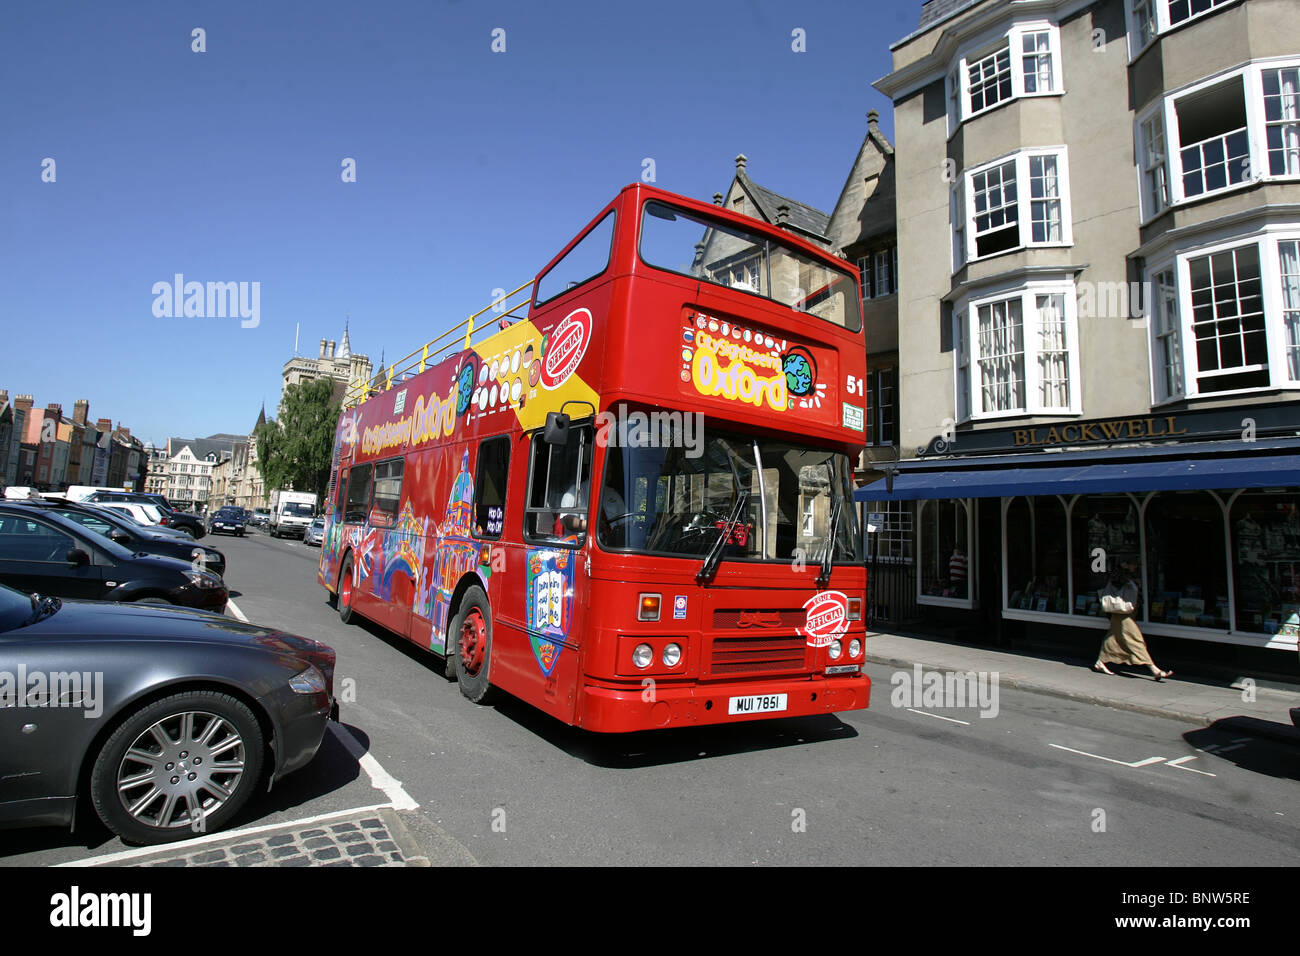 An Oxford Tour Bus passes the famous Blackwell bookshop in Oxford. Stock Photo